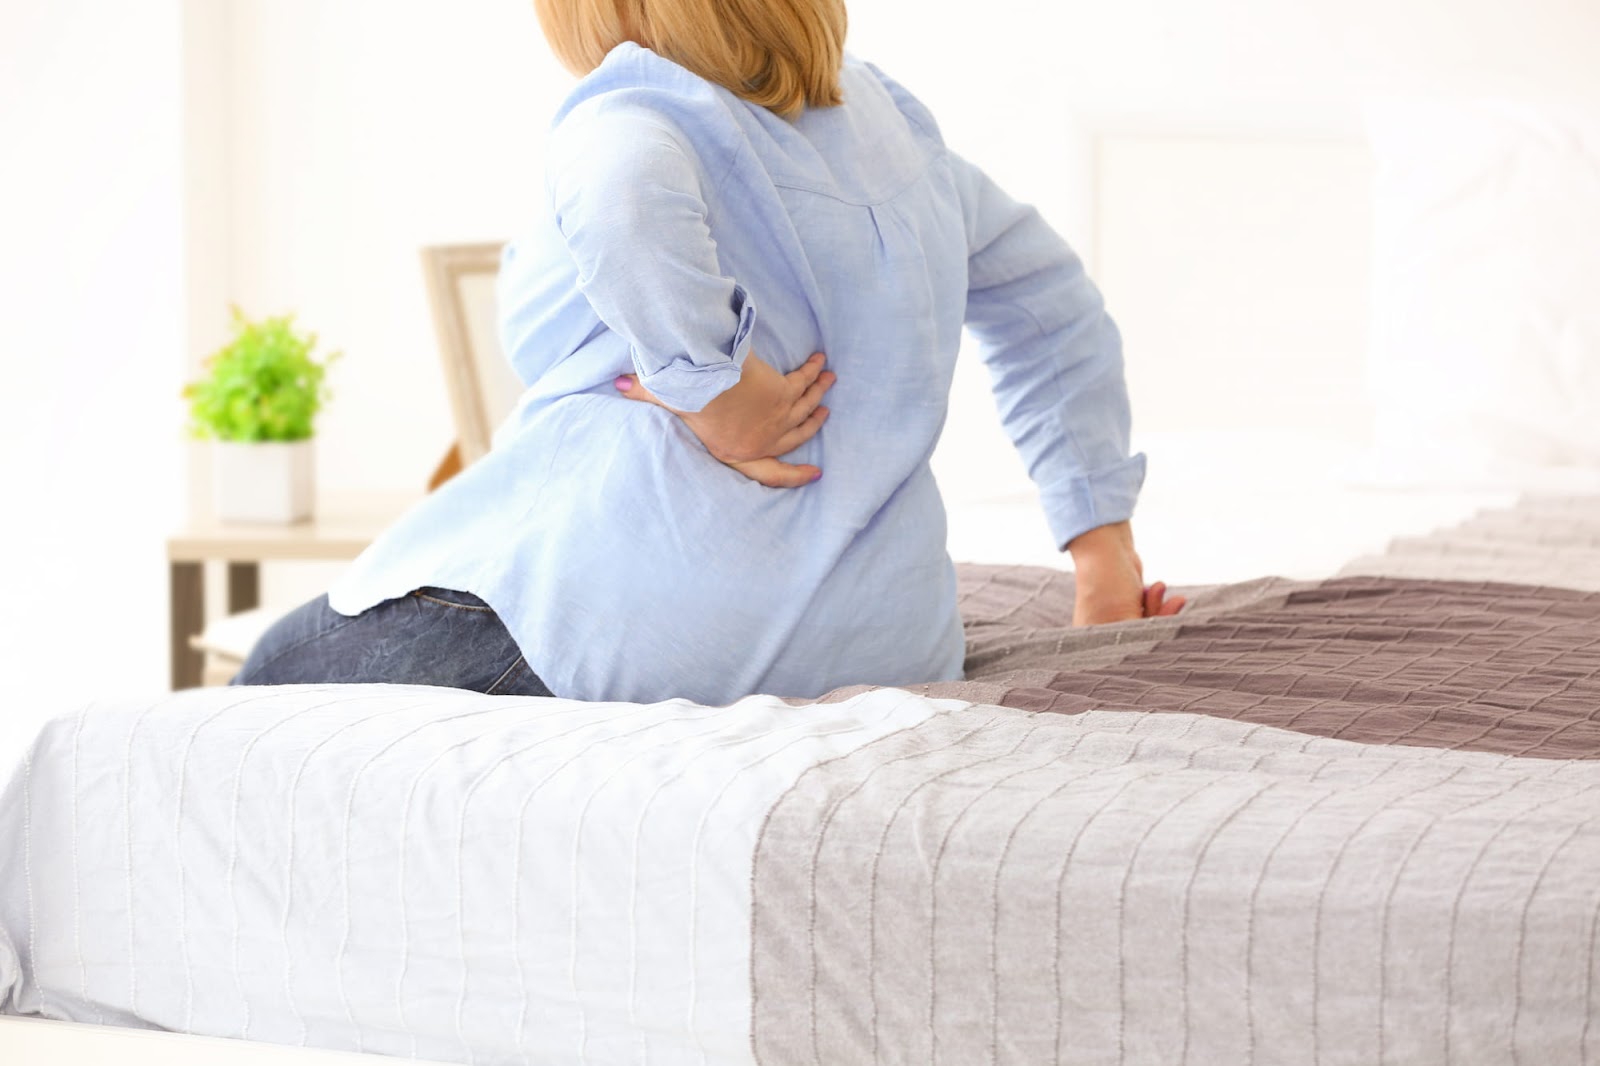  A woman in a sweater sits on a bed while holding back due to pain when taking a deep breath.